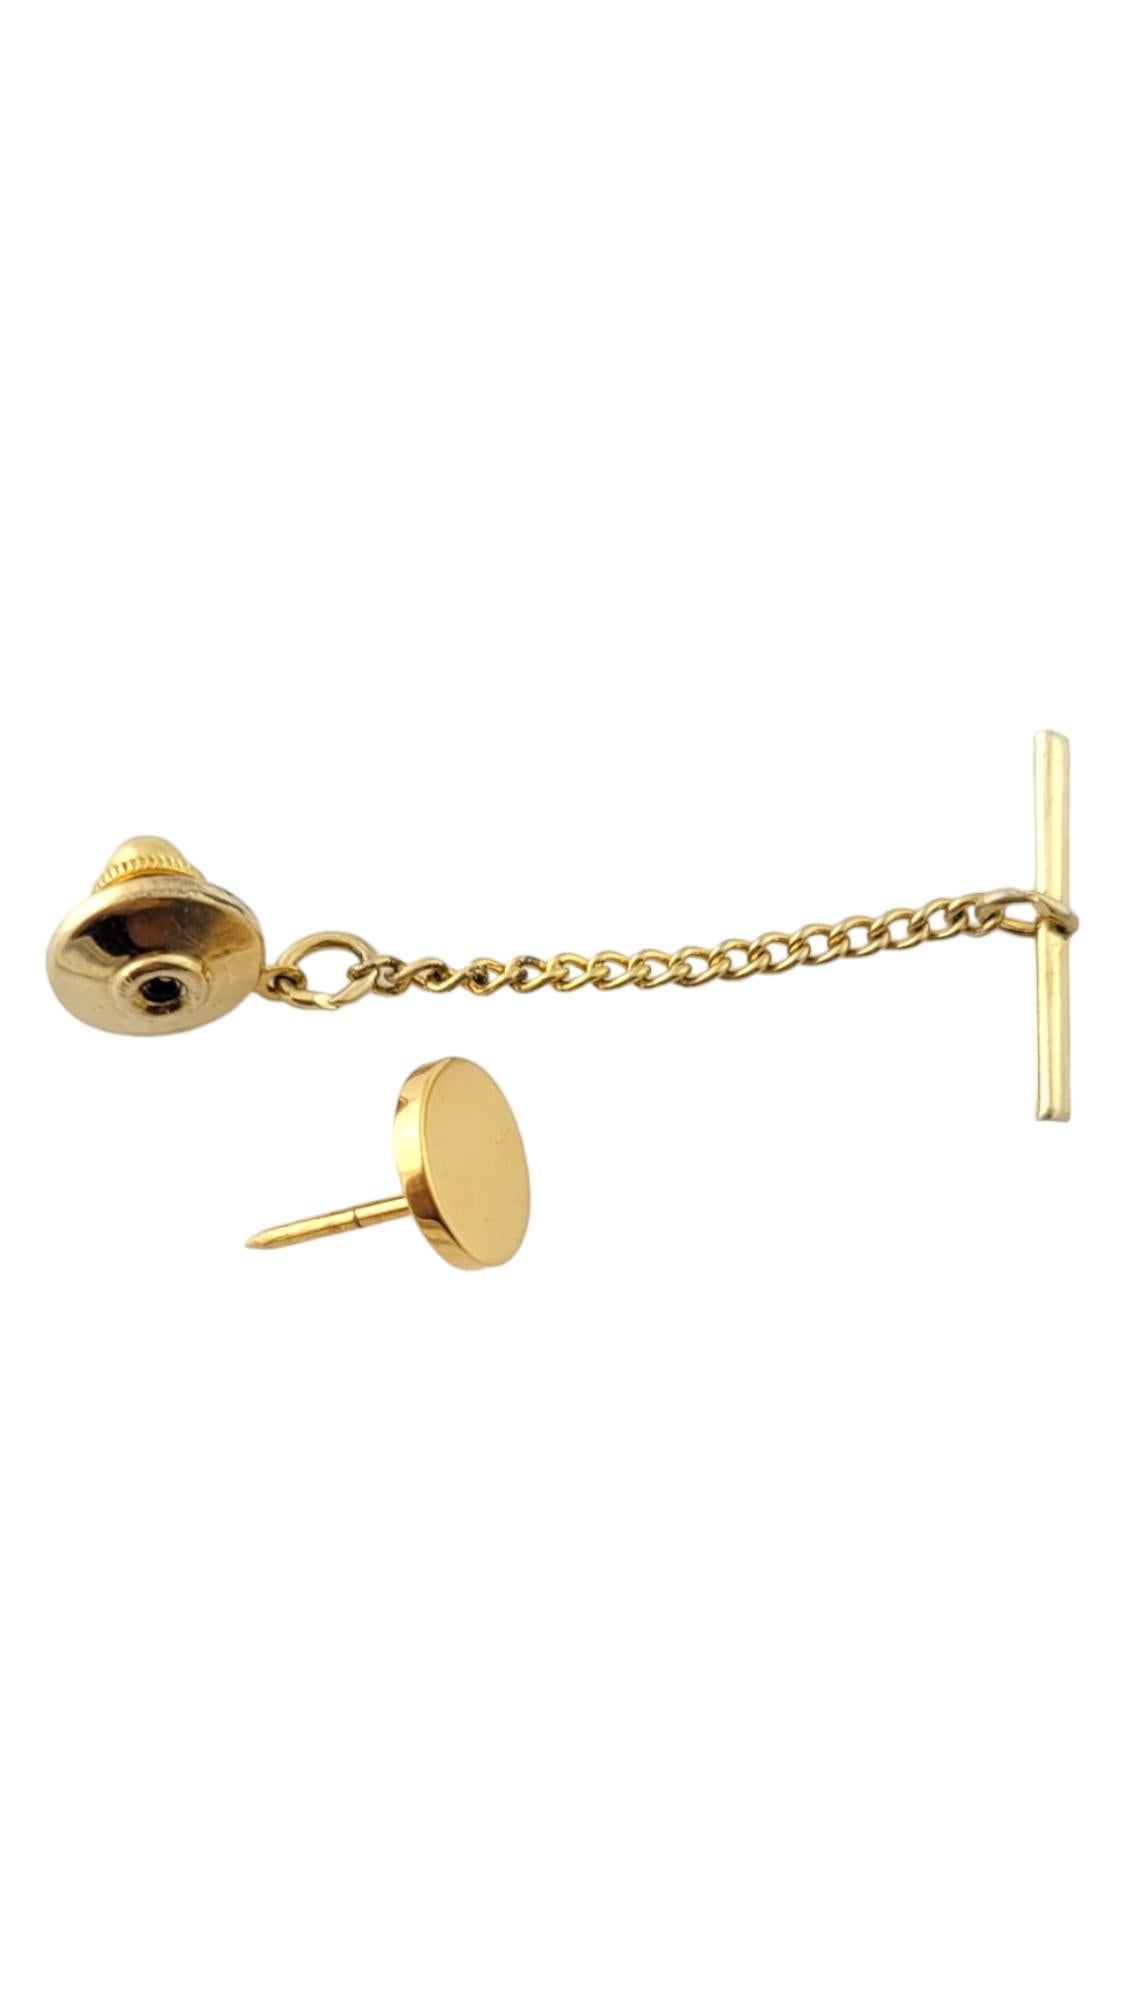 Vintage Tiffany & Co. 14K Yellow Gold Tie Tack-

This elegant tie tack by Tiffany & Co. is crafted in beautifully detailed 14K yellow gold

*Back and chain are not gold*

Size:  10 mm diameter
Hangs down 50.85mm
Dangle is approximately 19.04mm